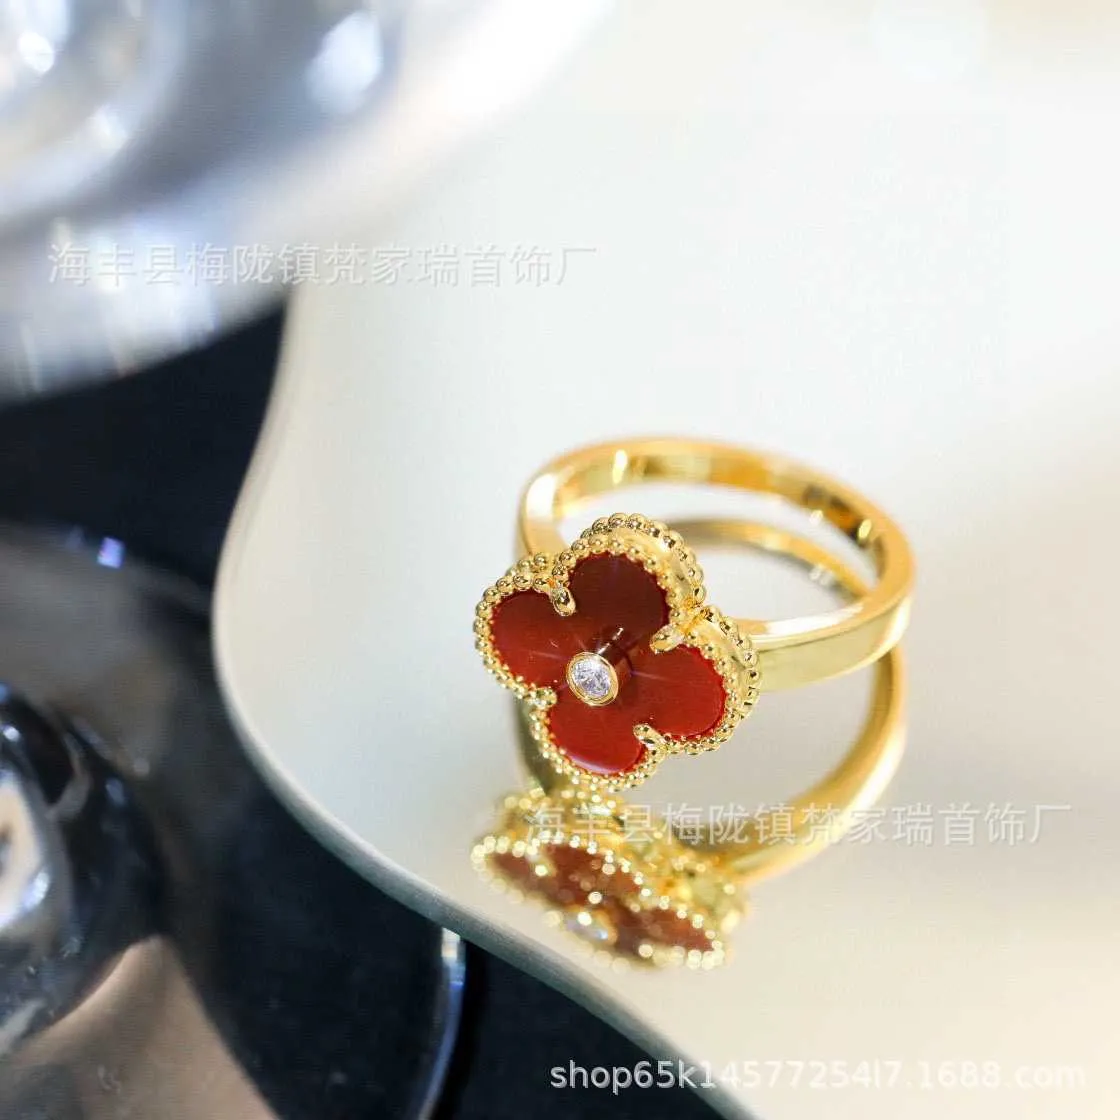 Designer Brand High version VAN K Gold Clover Ring Natural White Fritillaria Personality Lucky Flower Agate with Diamond Finger O